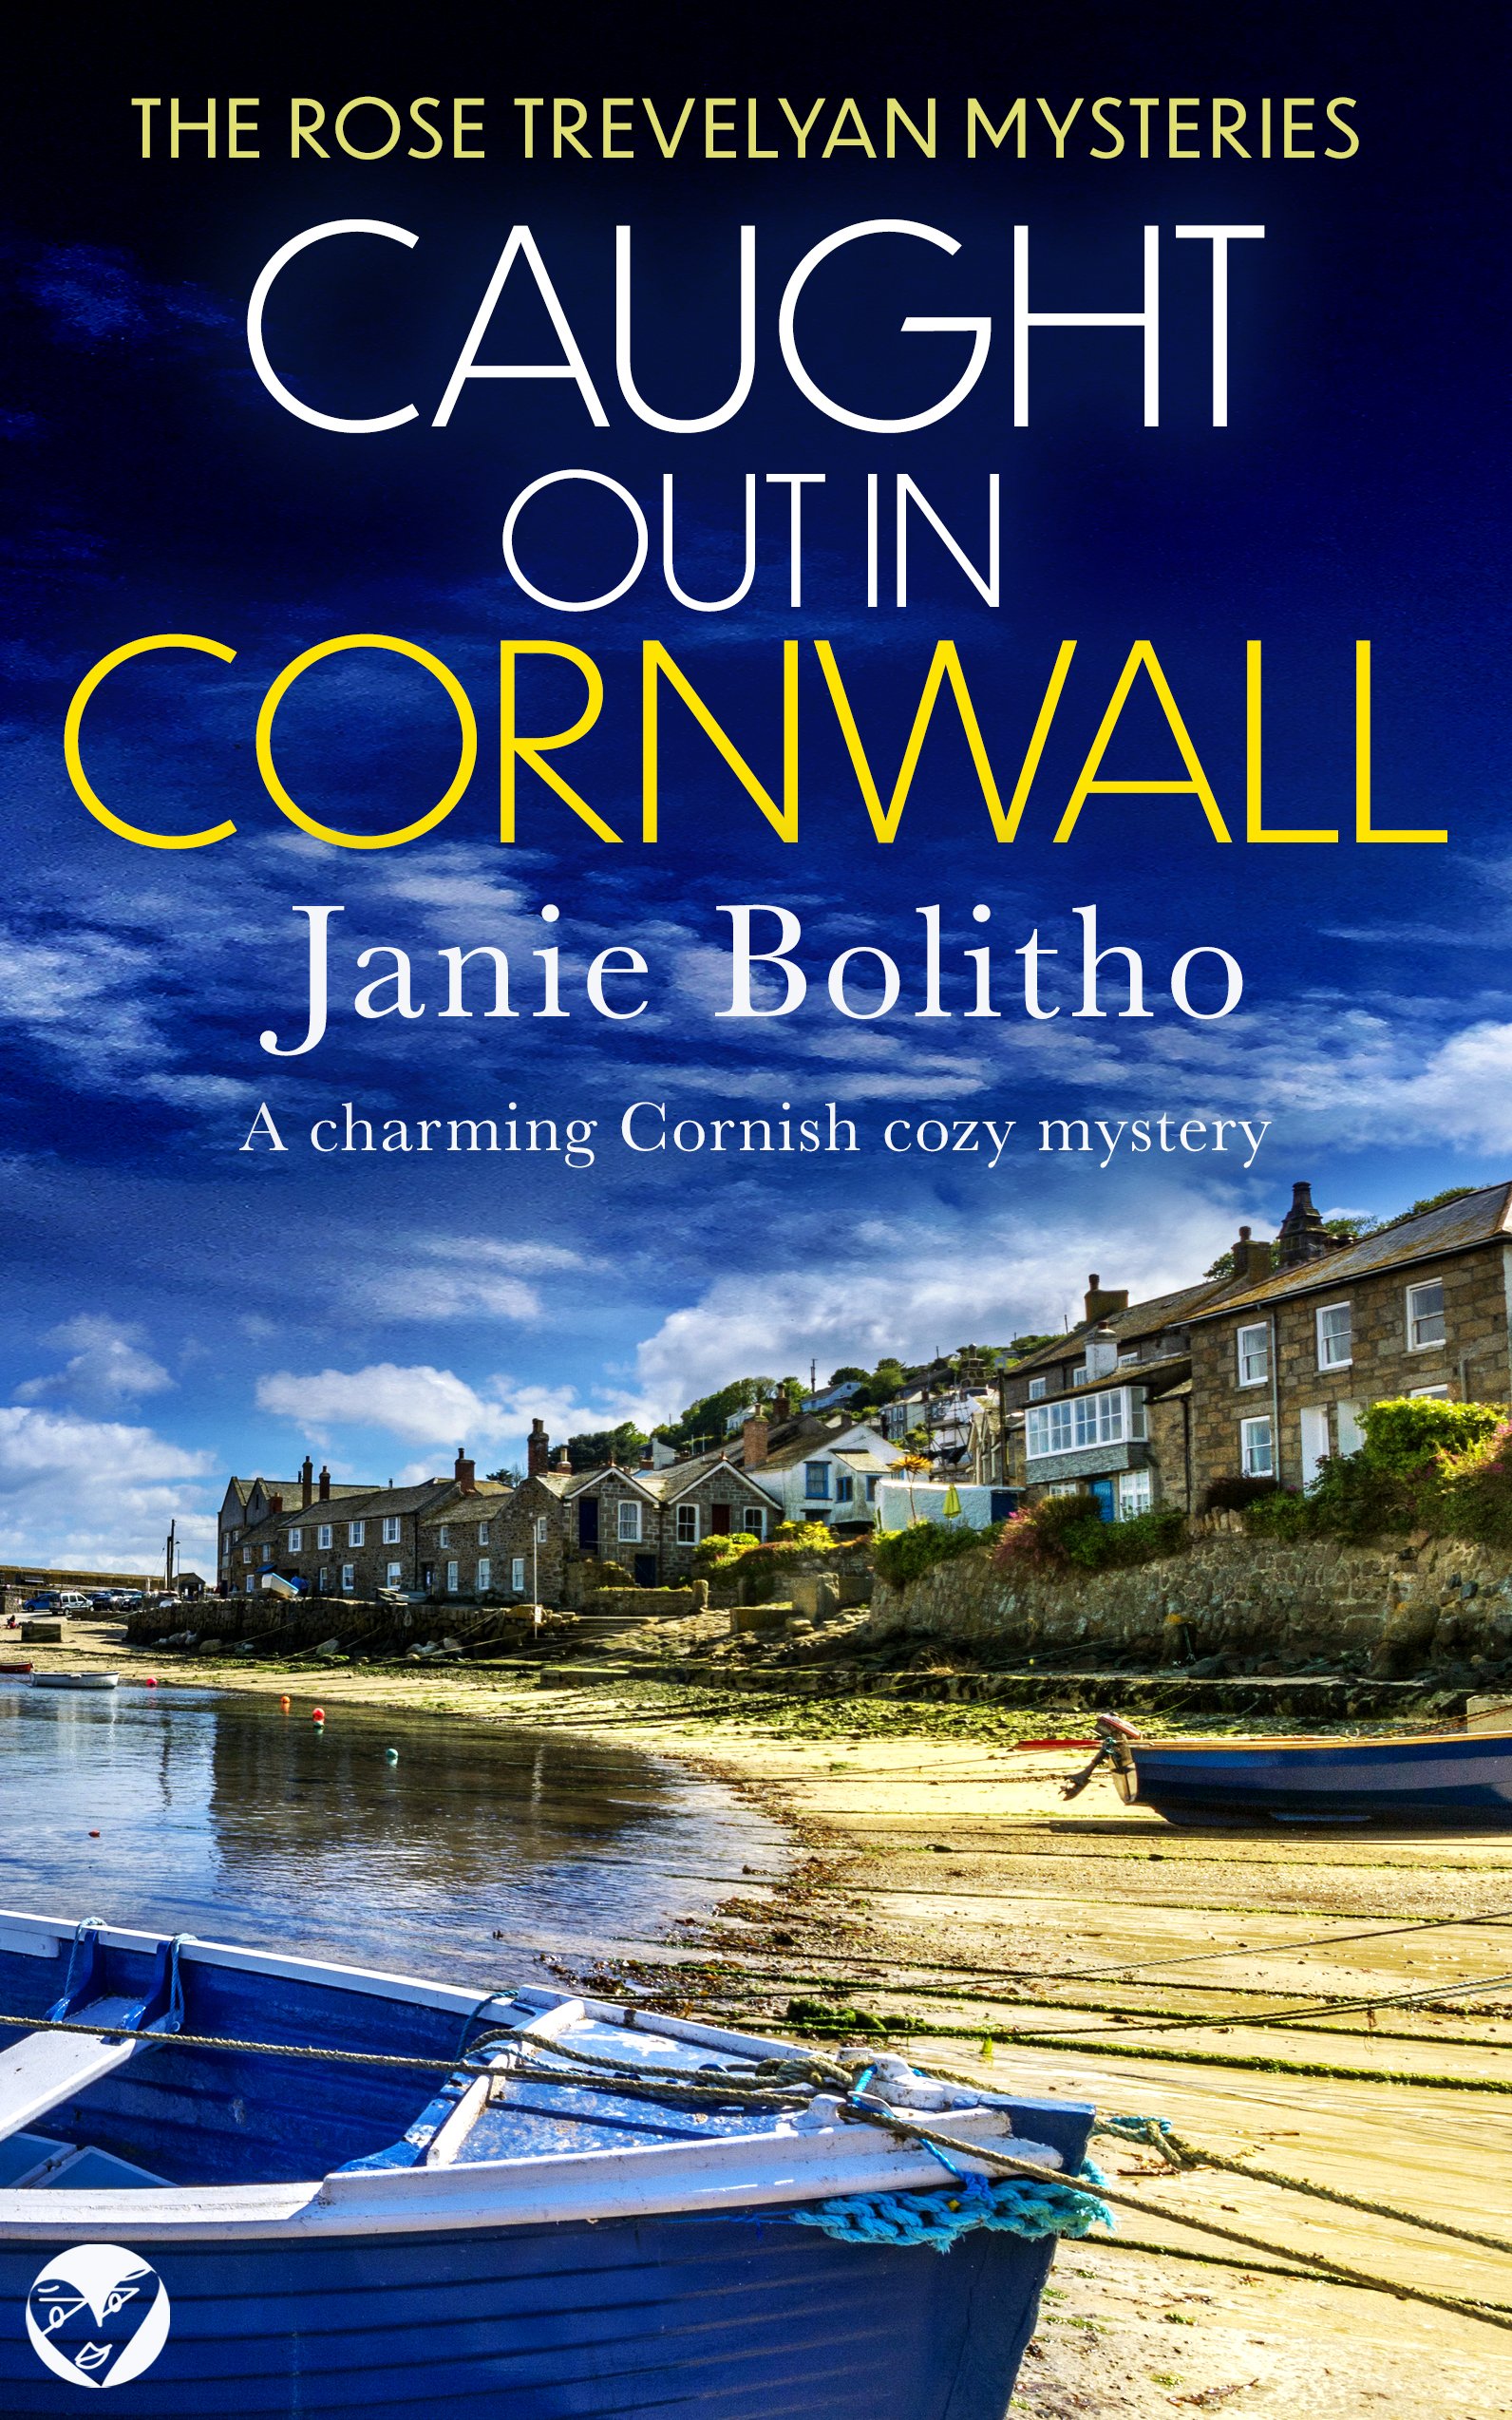 CAUGHT OUT IN CORNWALL Cover publish.jpg